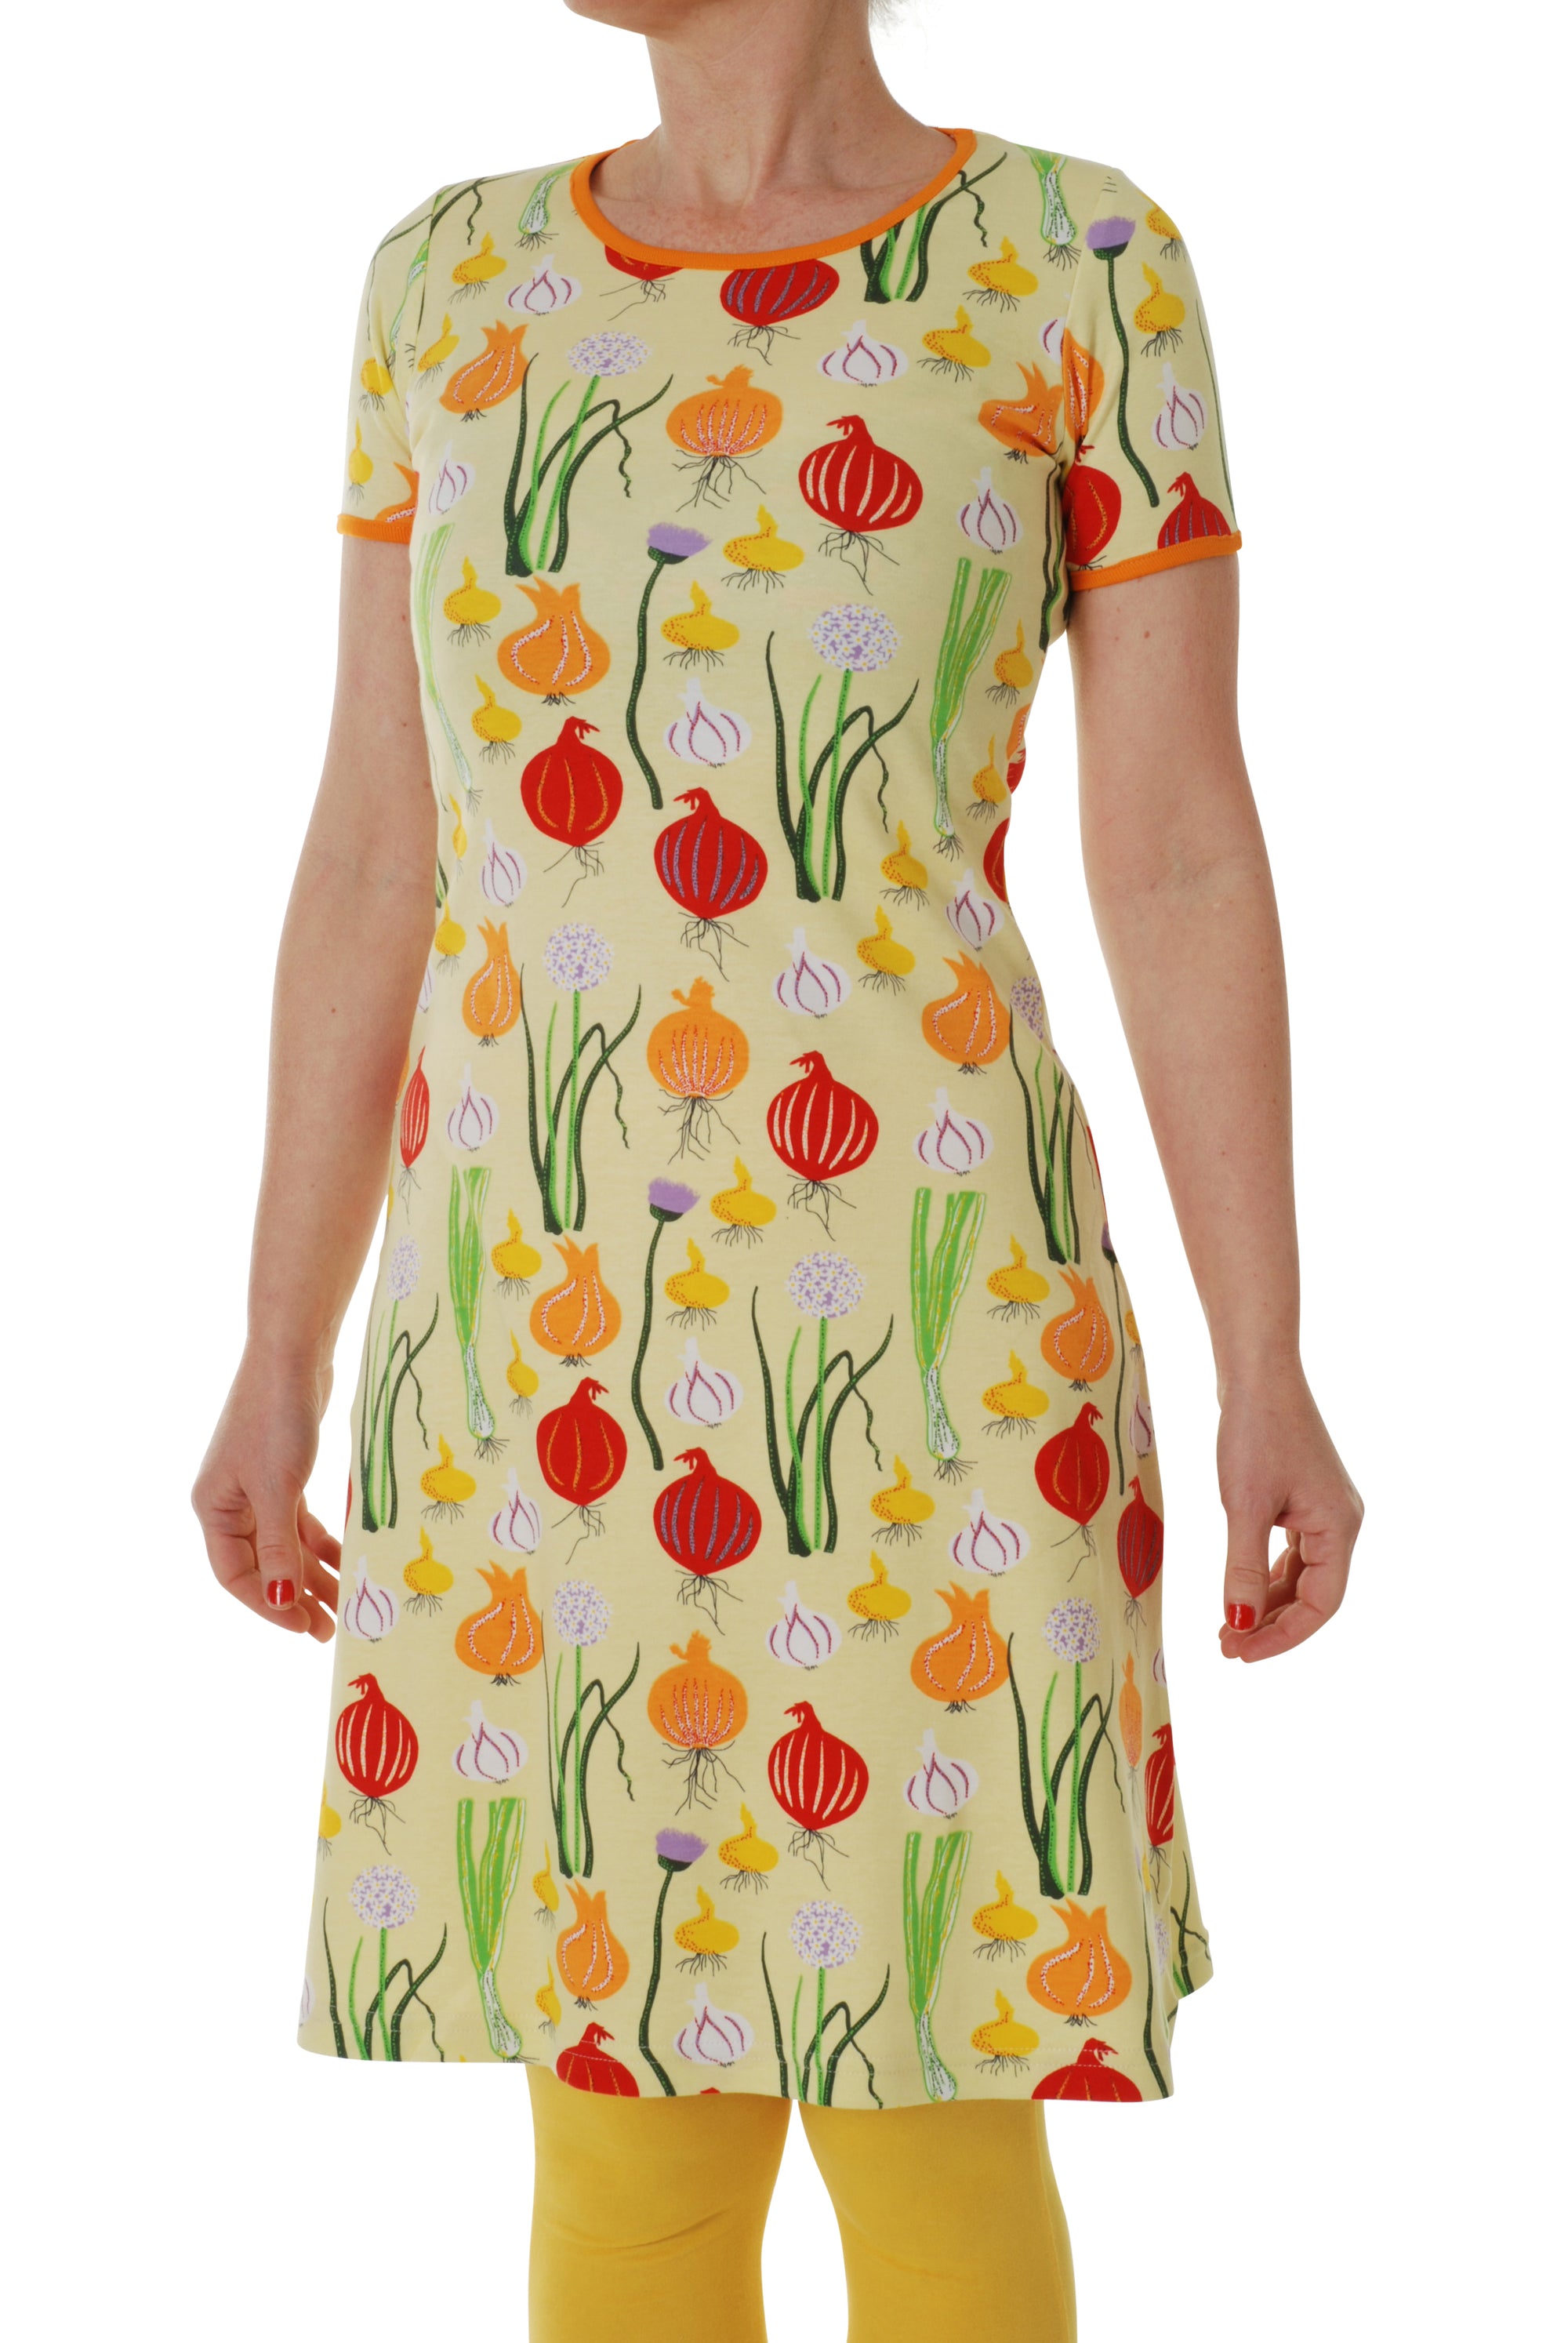 Duns Sweden ADULTS - Shortsleeve Dress Garlic, Chives & Onions - Look & uien Pale Green